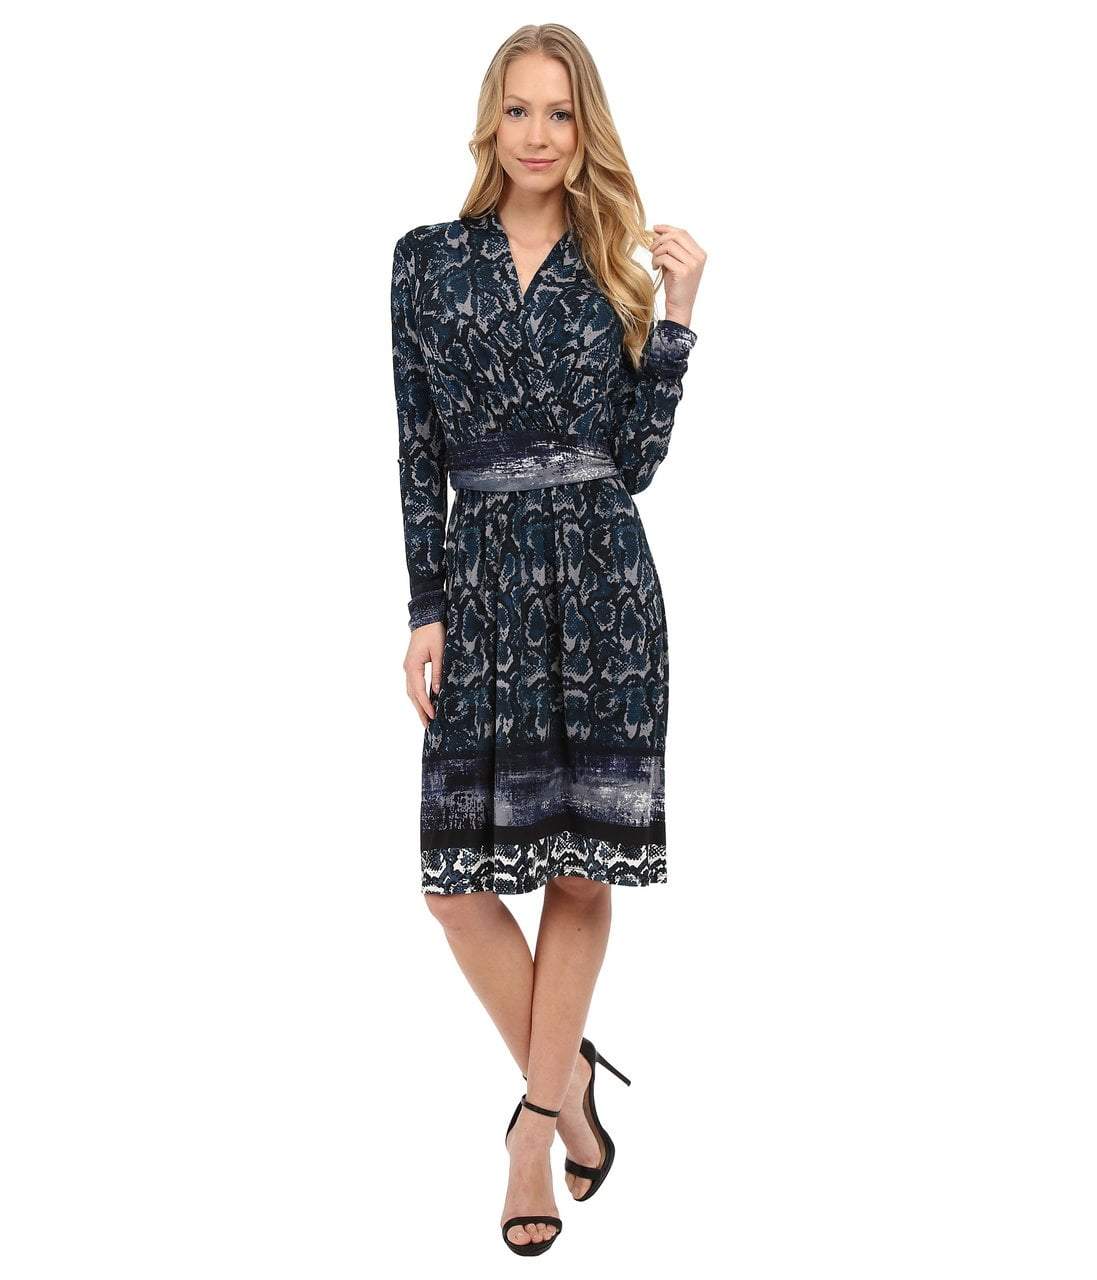 Adrianna Papell - Printed V-Neck Dress 15246570 in Print